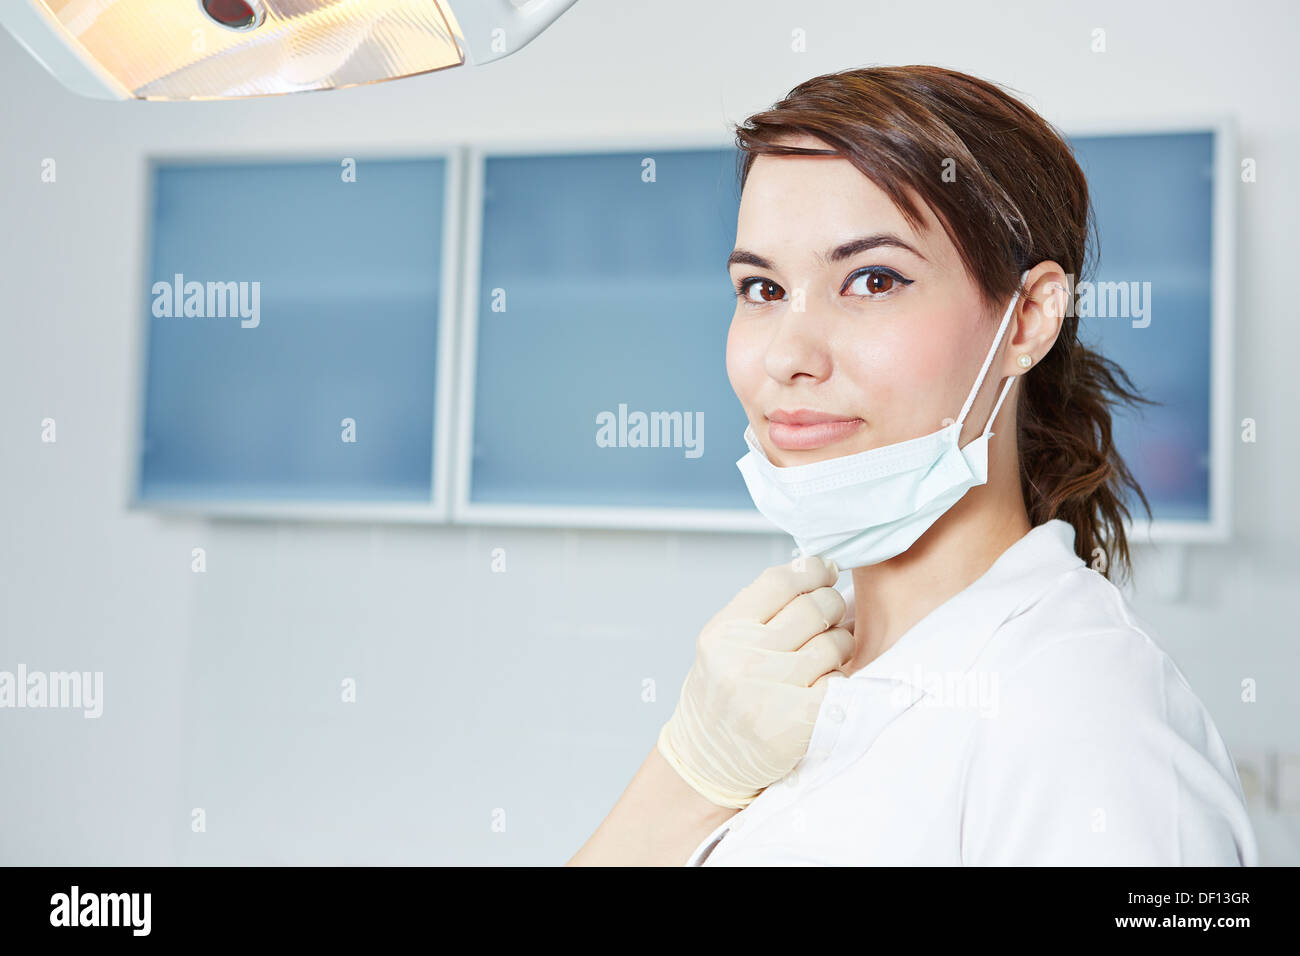 Smiling dental assistant with mouthguard in dental practice Stock Photo